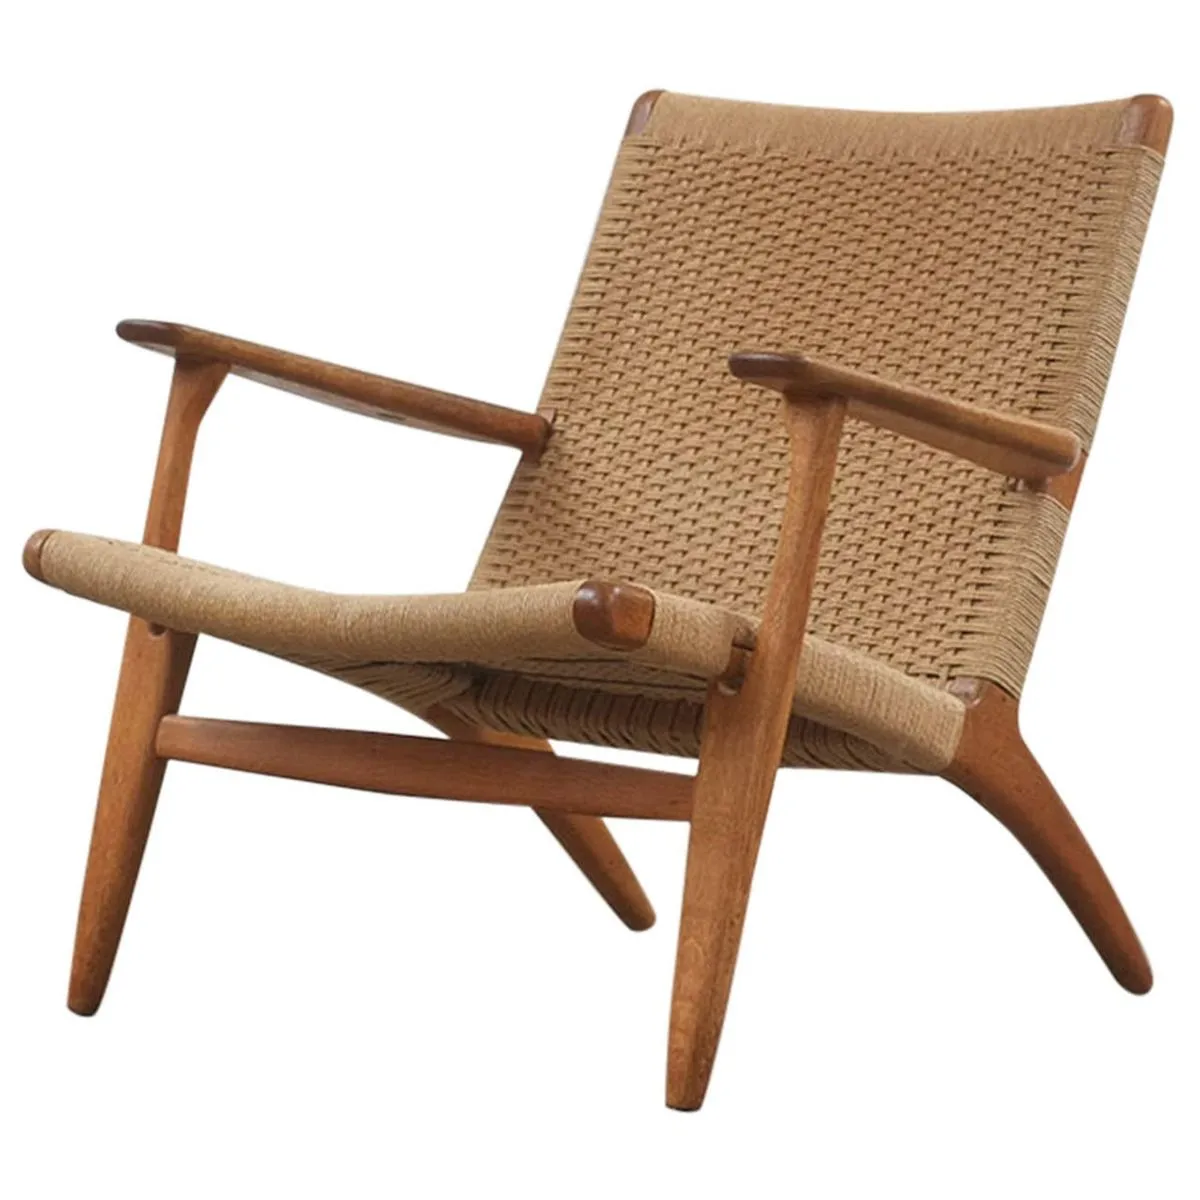 Wooden Antique Chair Buy Antique Wood Reclining Rocking Chair Antique Teak Wood Leather Chairs Folding Wood Chair Product On Alibaba Com